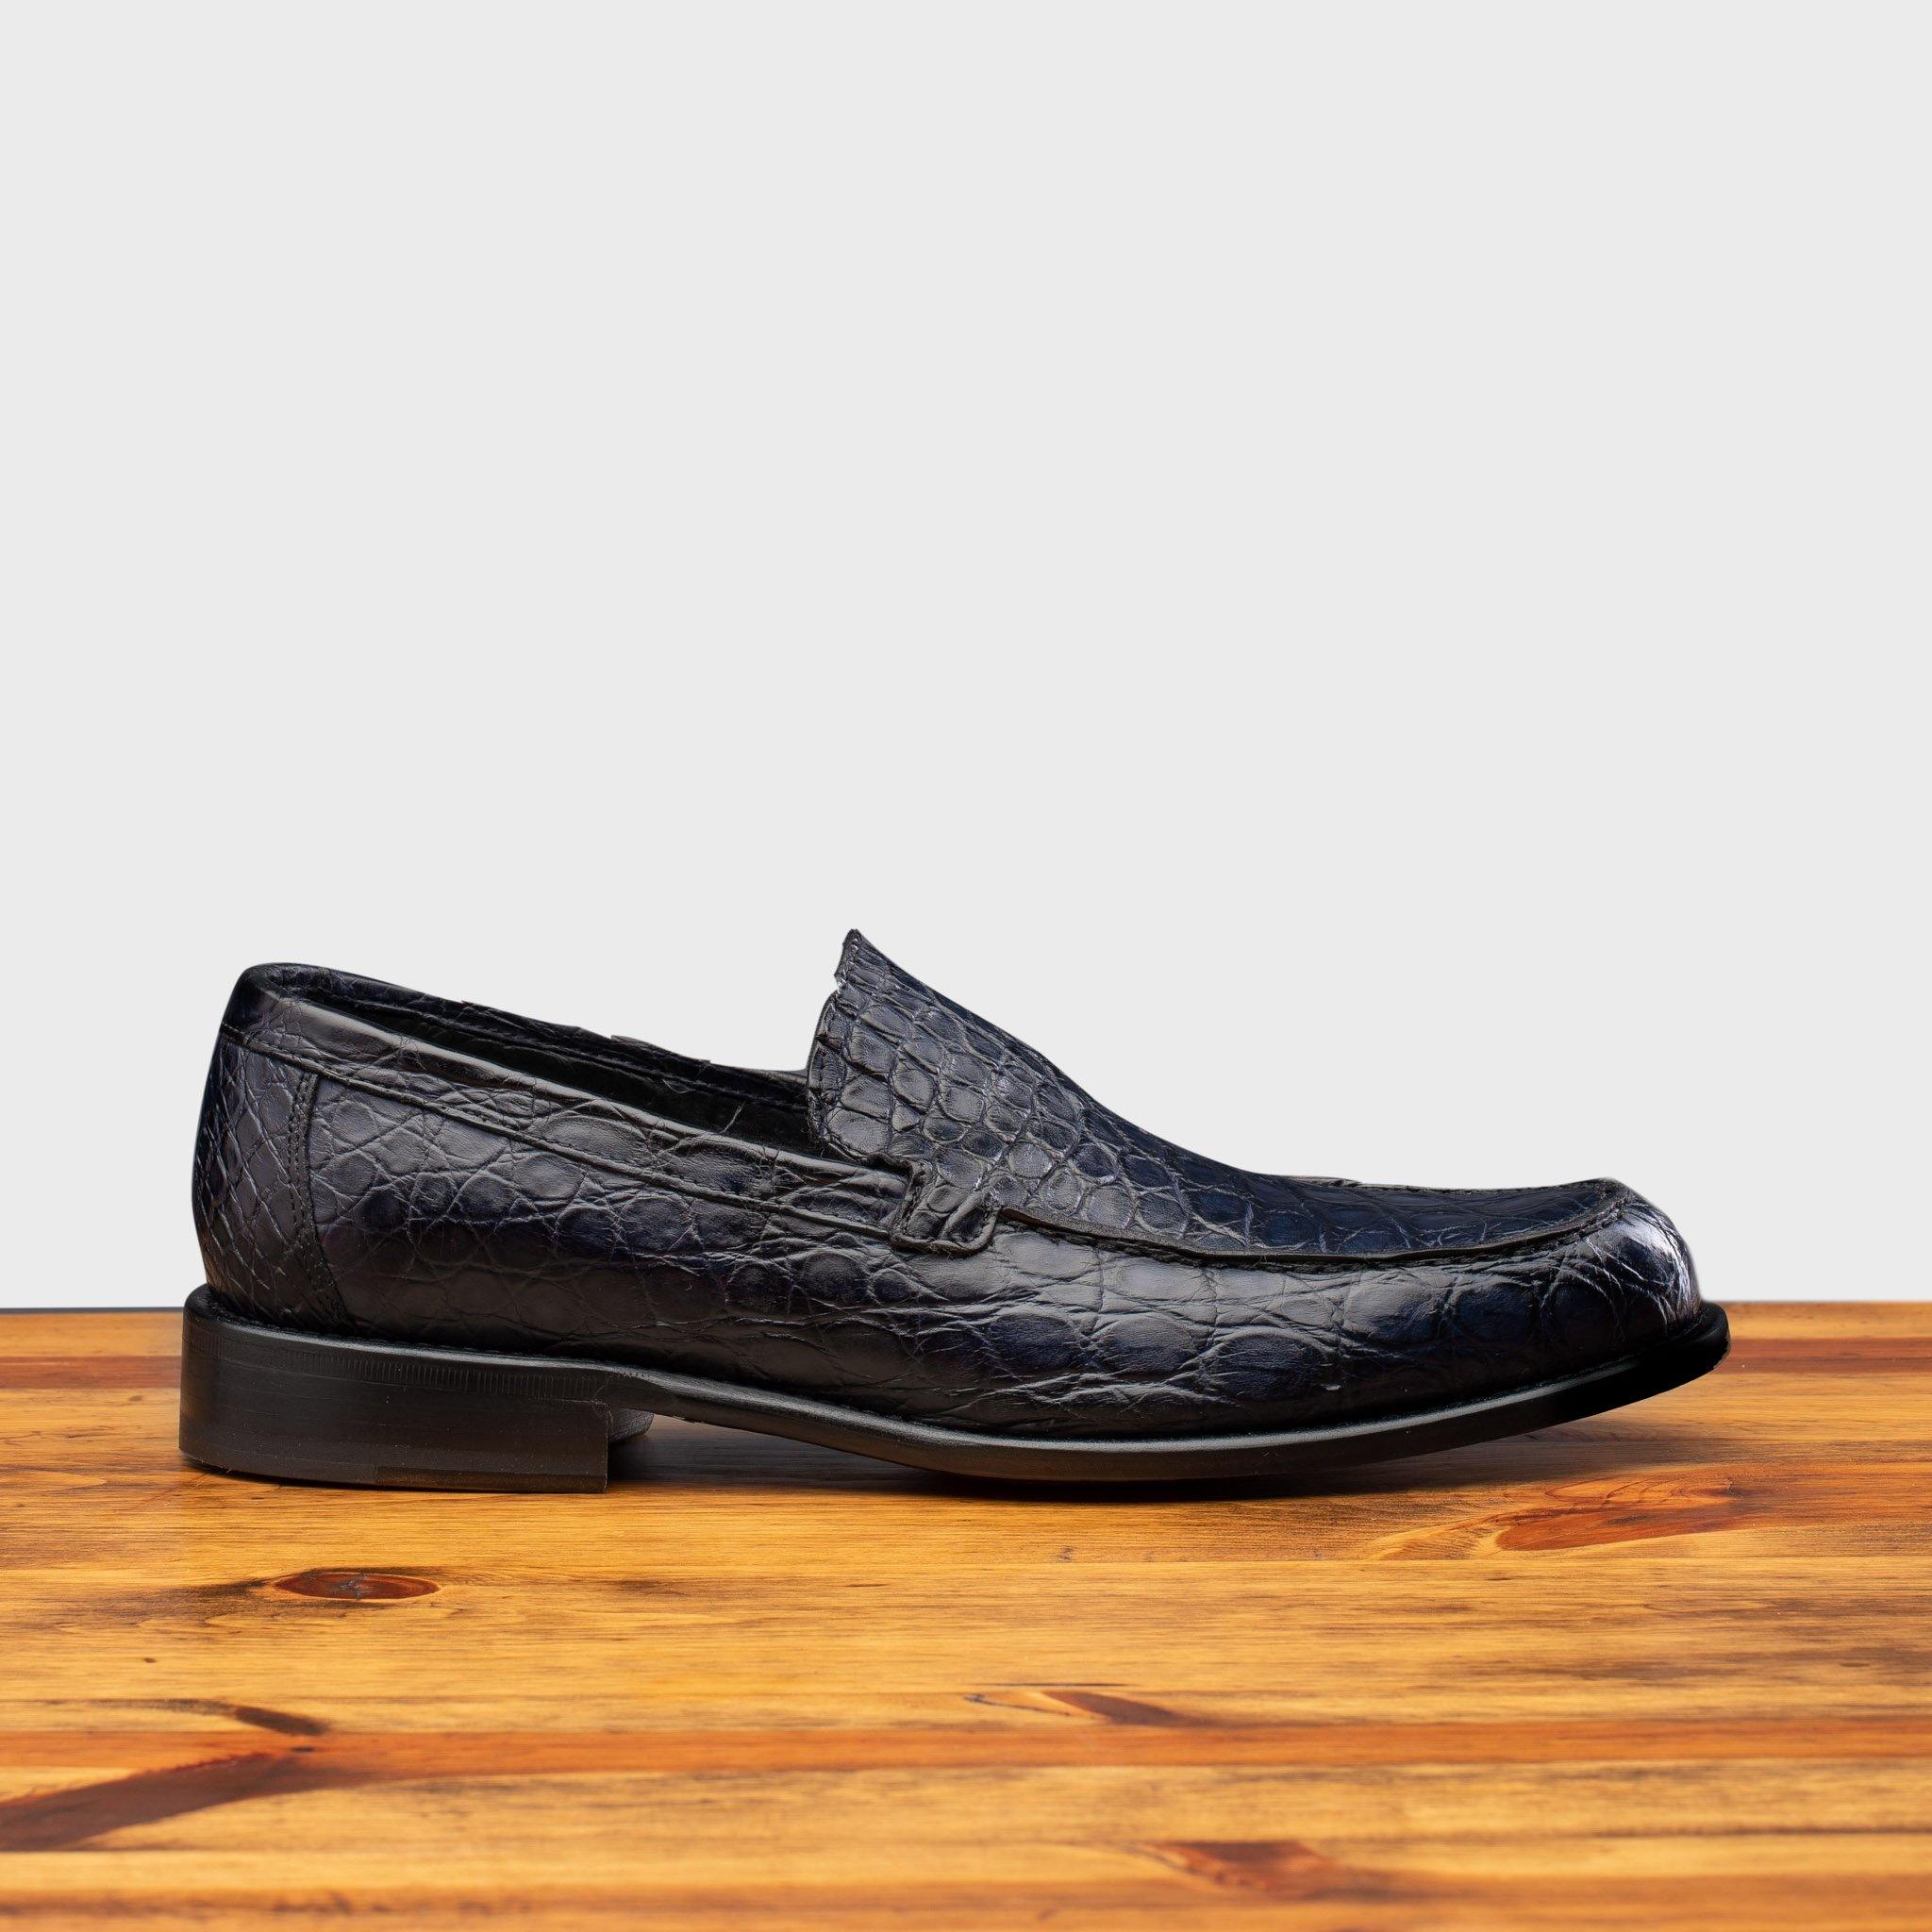 Side profile of 5034 Calzoleria Toscana Ocean Blue Crocodile Slip-On on top of a wooden table